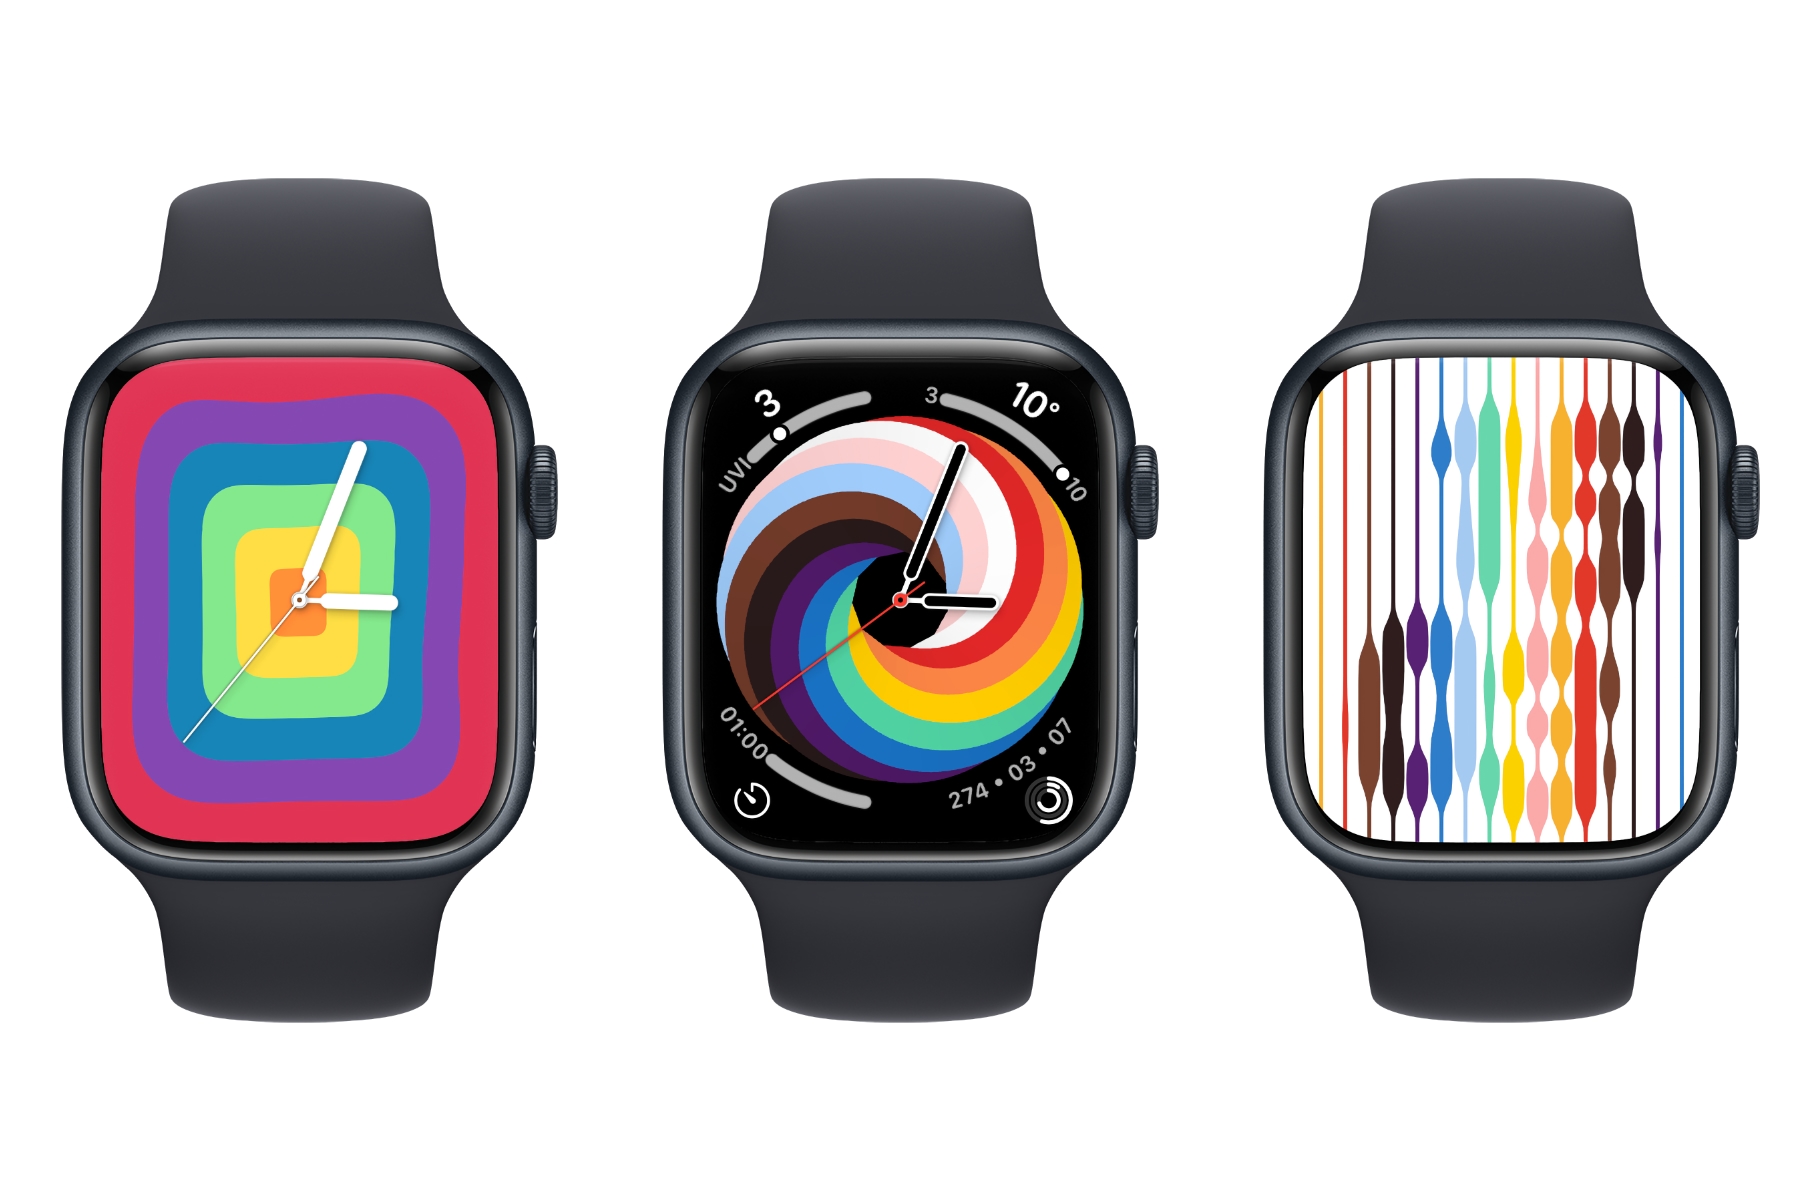 Three Apple Watches showing Pride Analog, Pride Woven Circular, and Pride Threads faces.